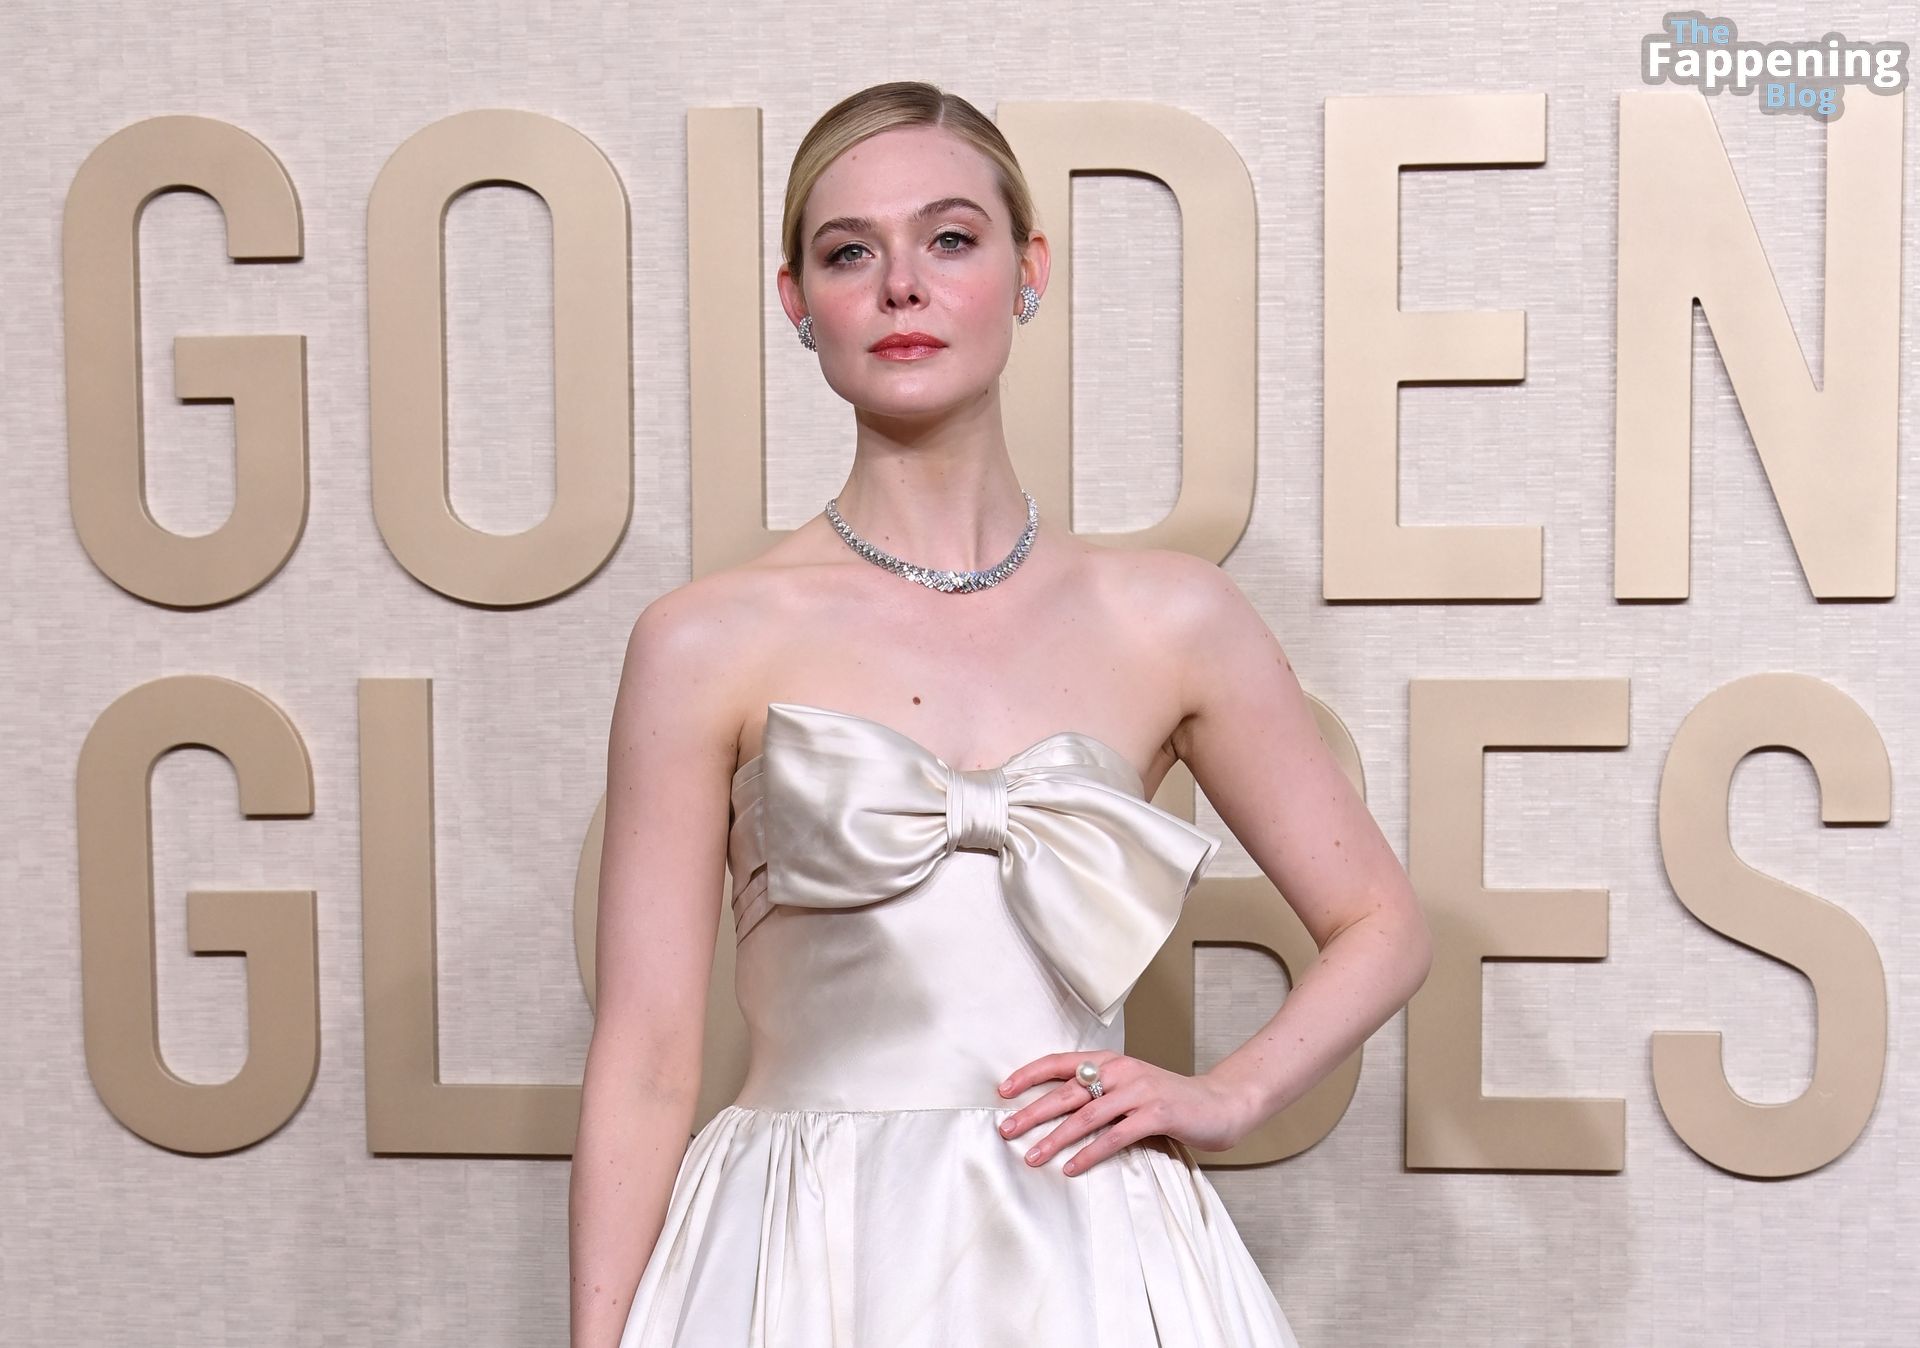 Elle-Fanning-Sexy-54-The-Fappening-Blog.jpg